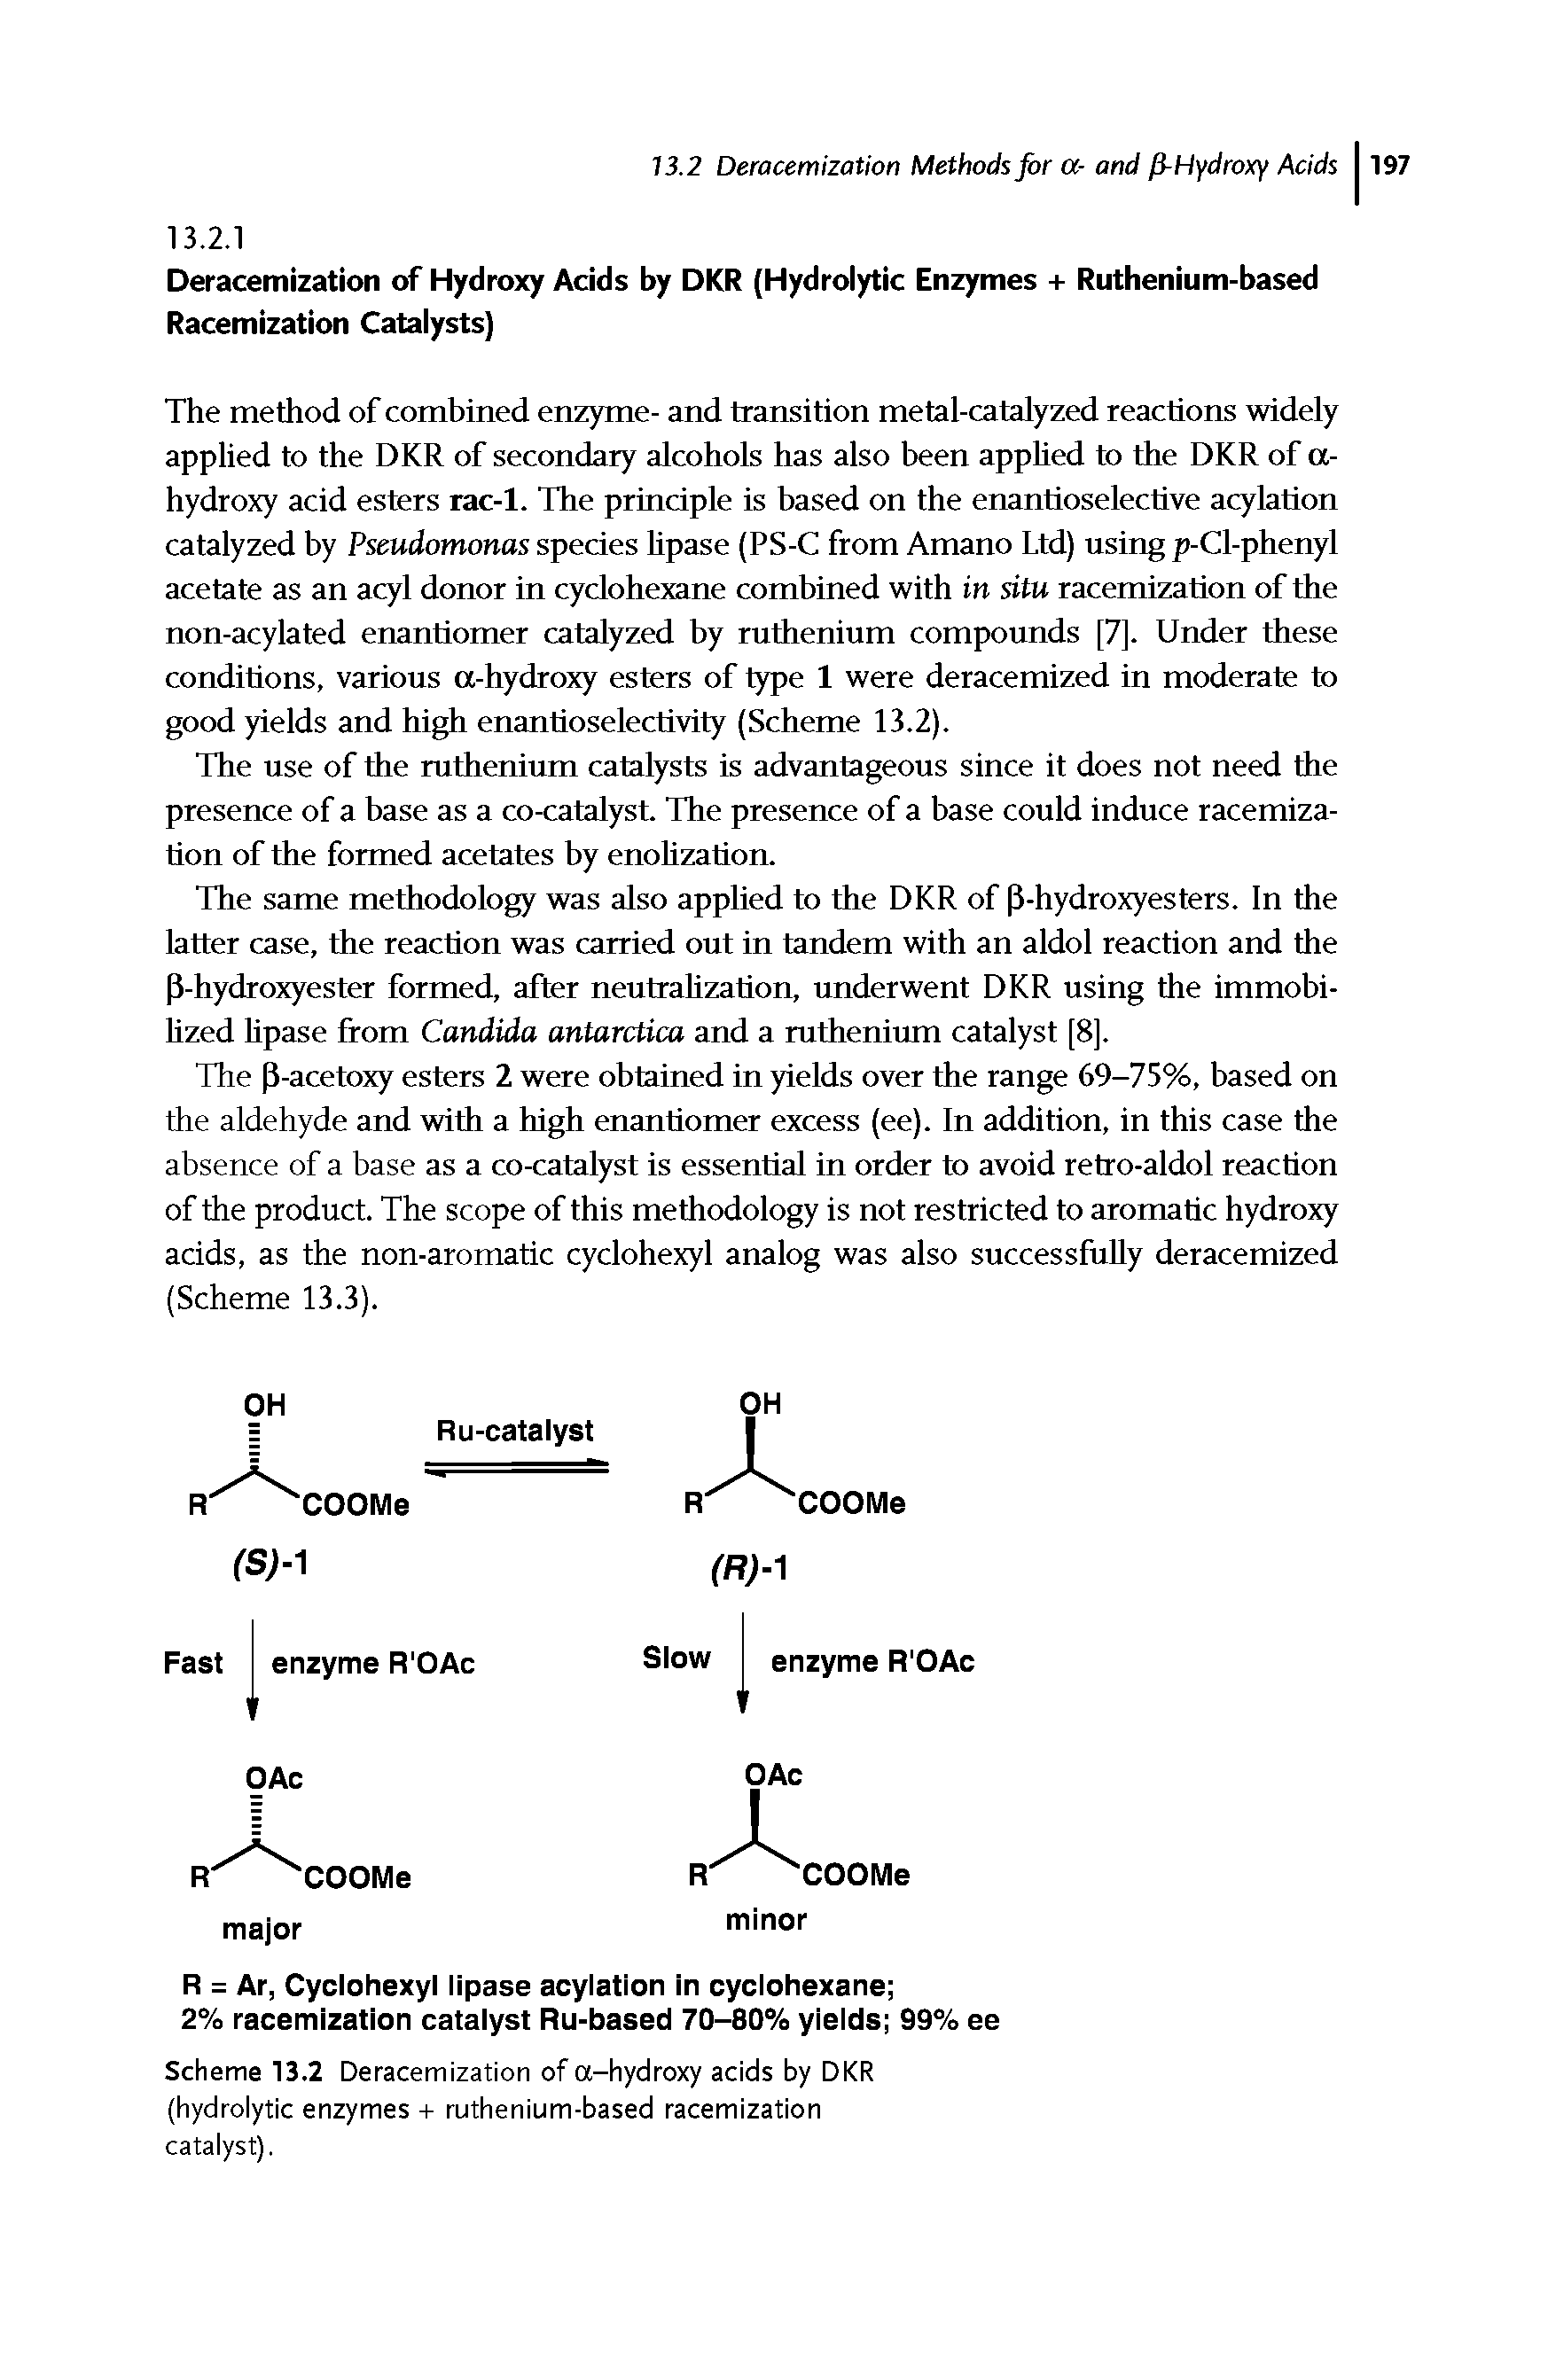 Scheme 13.2 Deracemization of a-hydroxy acids by DKR (hydrolytic enzymes + ruthenium-based racemization catalyst).